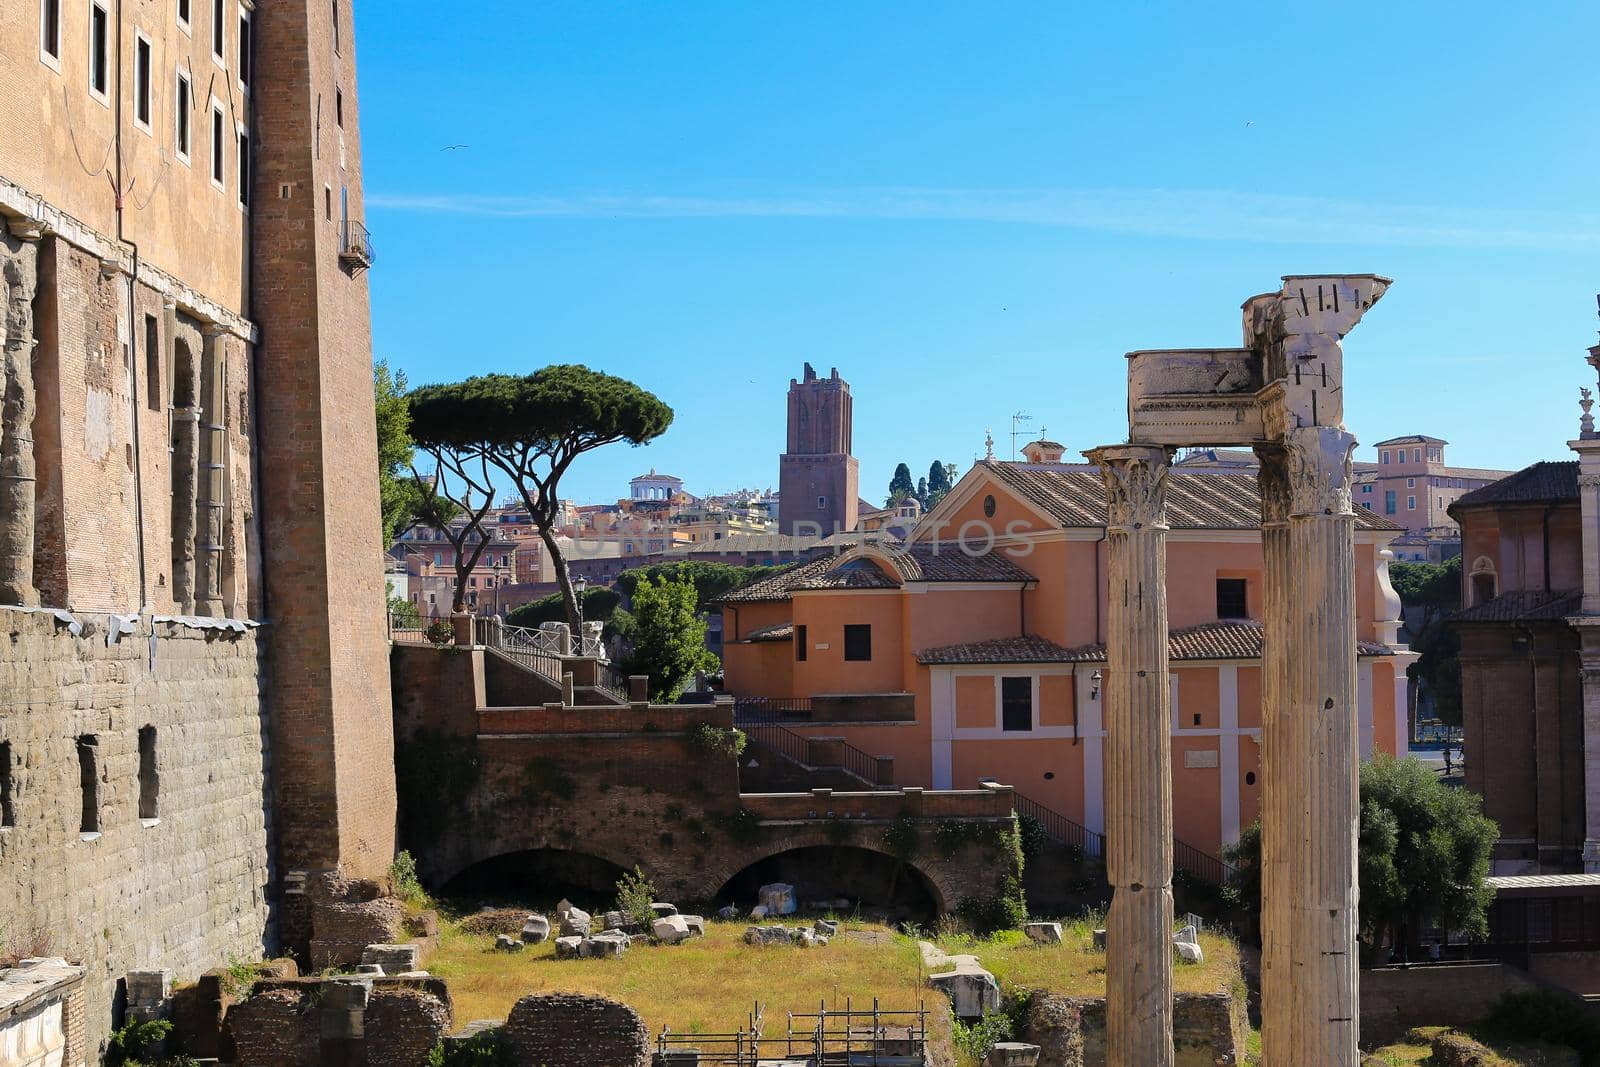 Antique columns and ruins in Rome, Italy. Conceptof Roman Forum and european sightseeing, summer vacations in Europe.